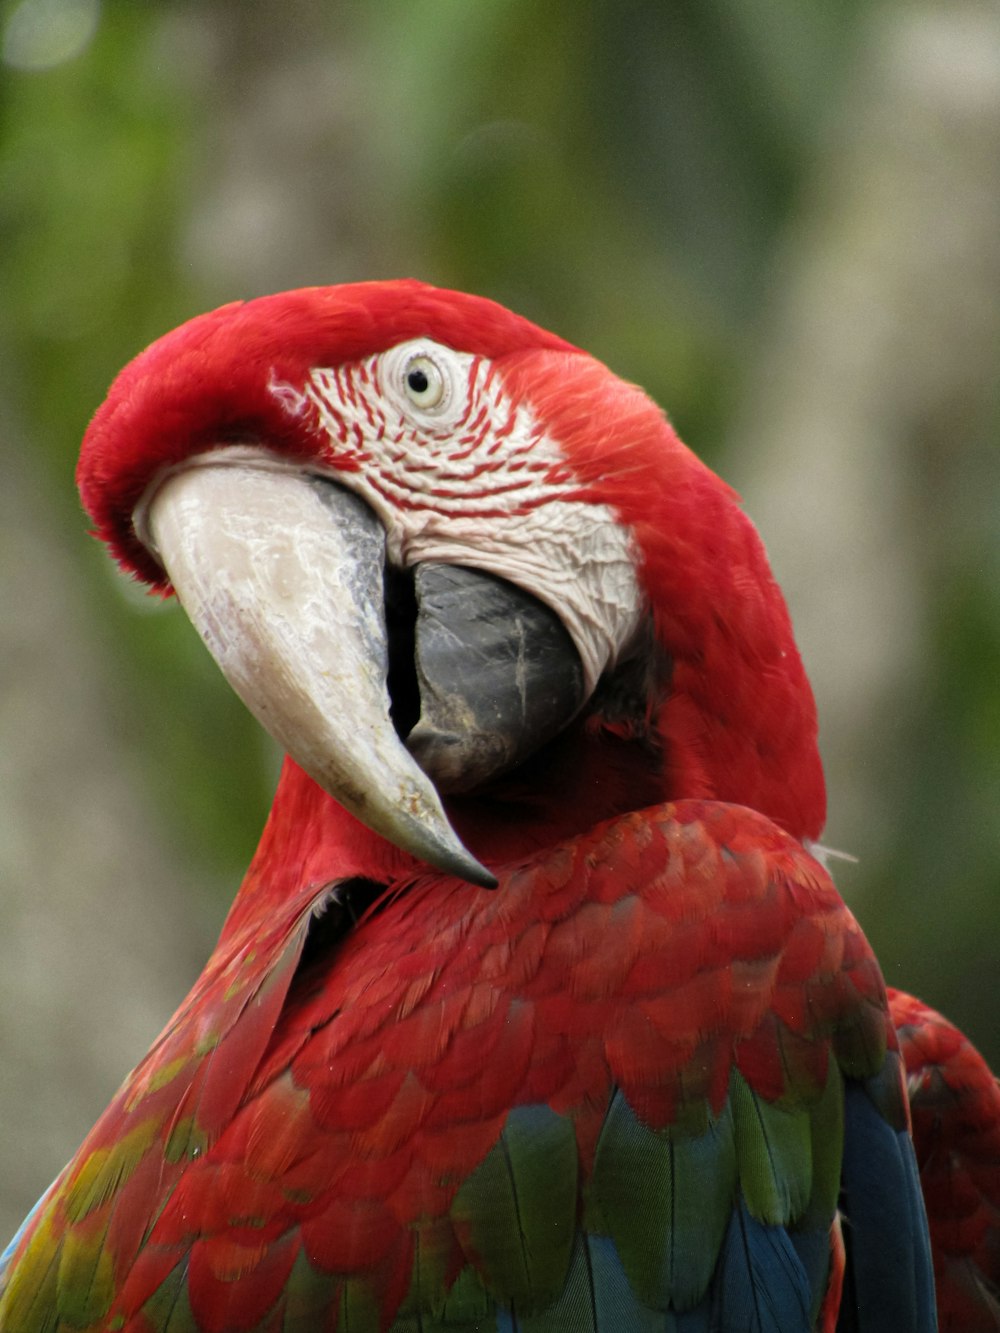 a close up of a red and green parrot